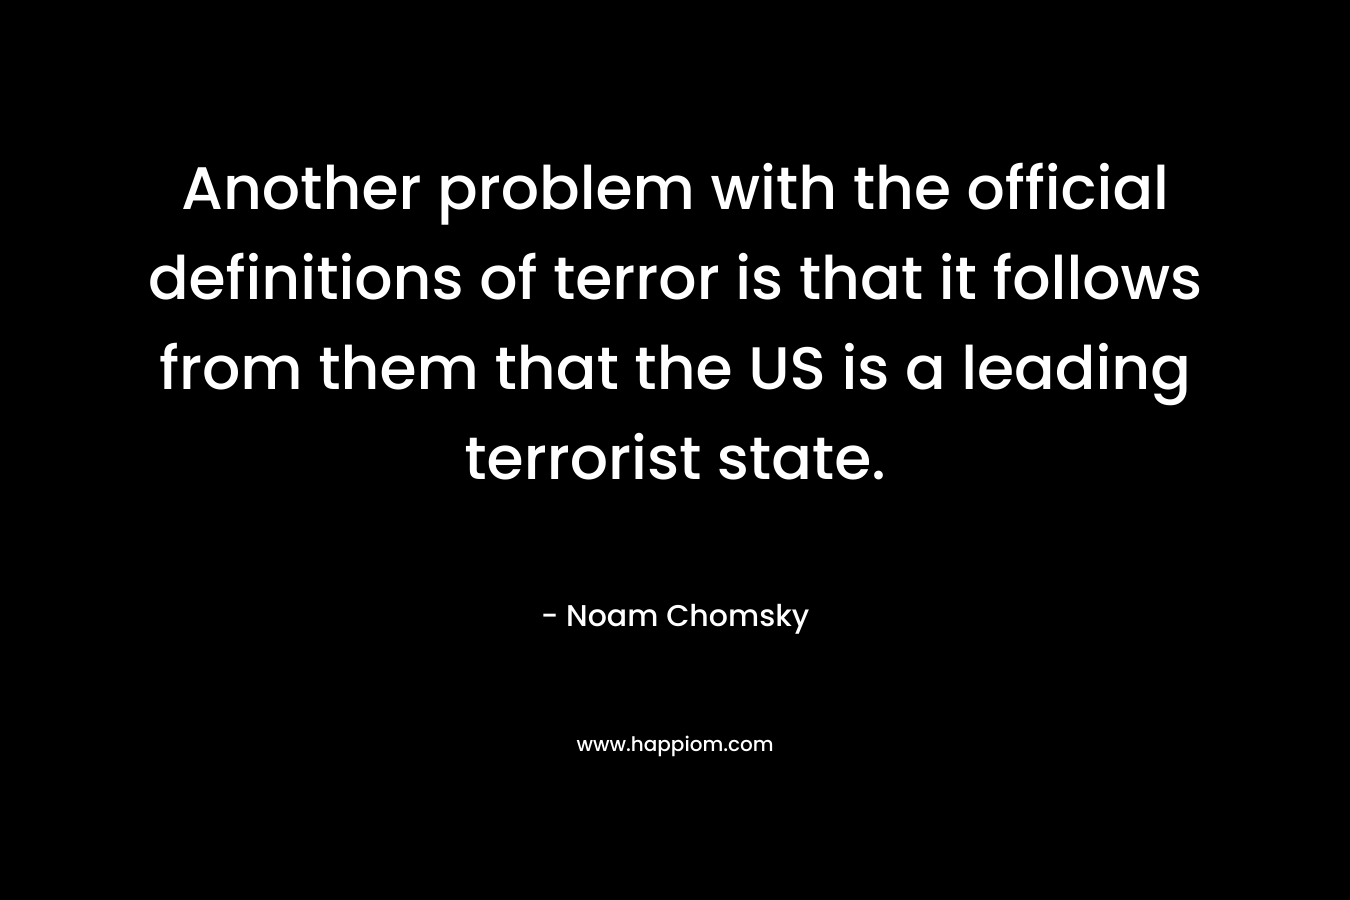 Another problem with the official definitions of terror is that it follows from them that the US is a leading terrorist state.